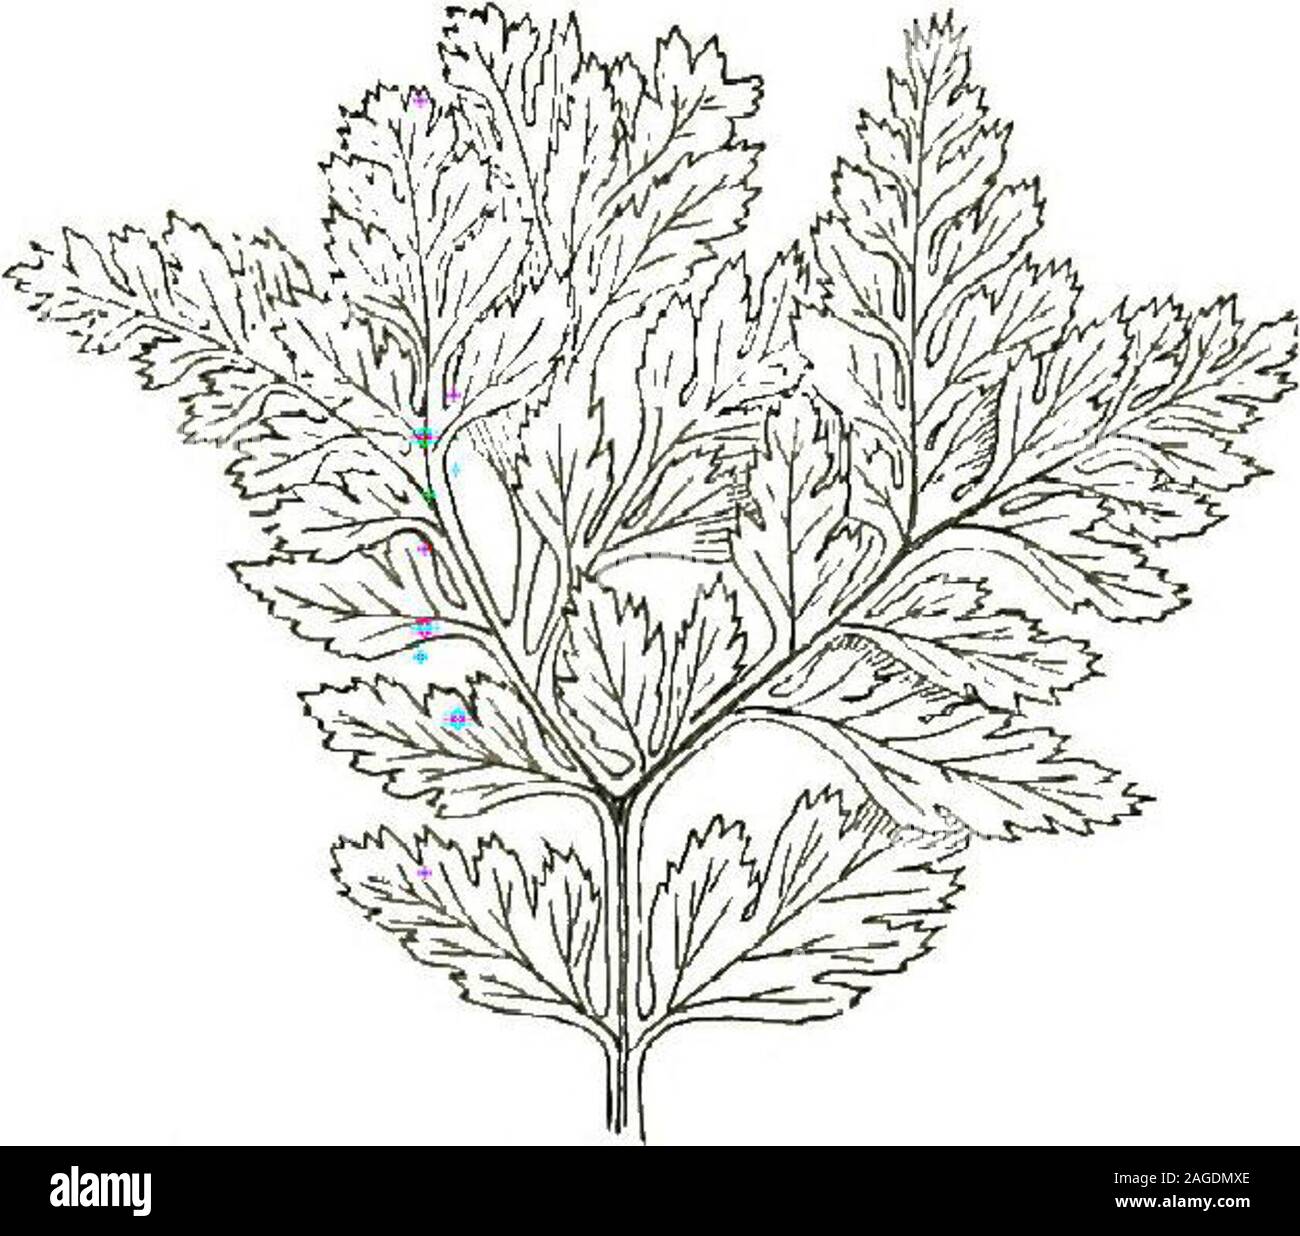 . British ferns and their varieties. Fig. 25. Asp. ad. nig. microdot*. Microdon (Fig. 25).—Found in Guernsey ; is a counterpart ofthe variety of Asp. lanceolalum similarly named ; it is presumablya plumose form, and is, we believe, barren, the spores, thoughapparently plentiful, being aborted. THE ASPLENIA n. Fig. 26. Asp. ad. itig. ramosum. Ramosum (Fig. 26).—Foundby the Rev. C. Padley ; is awell-crested form at the frondapex. asplenium ceterach(Ceterach Officinarum)The Scaly Spleenwort(Plate V) This pretty and very distinctmember of the Spleenwortfamily is found in many partsof the country, Stock Photo